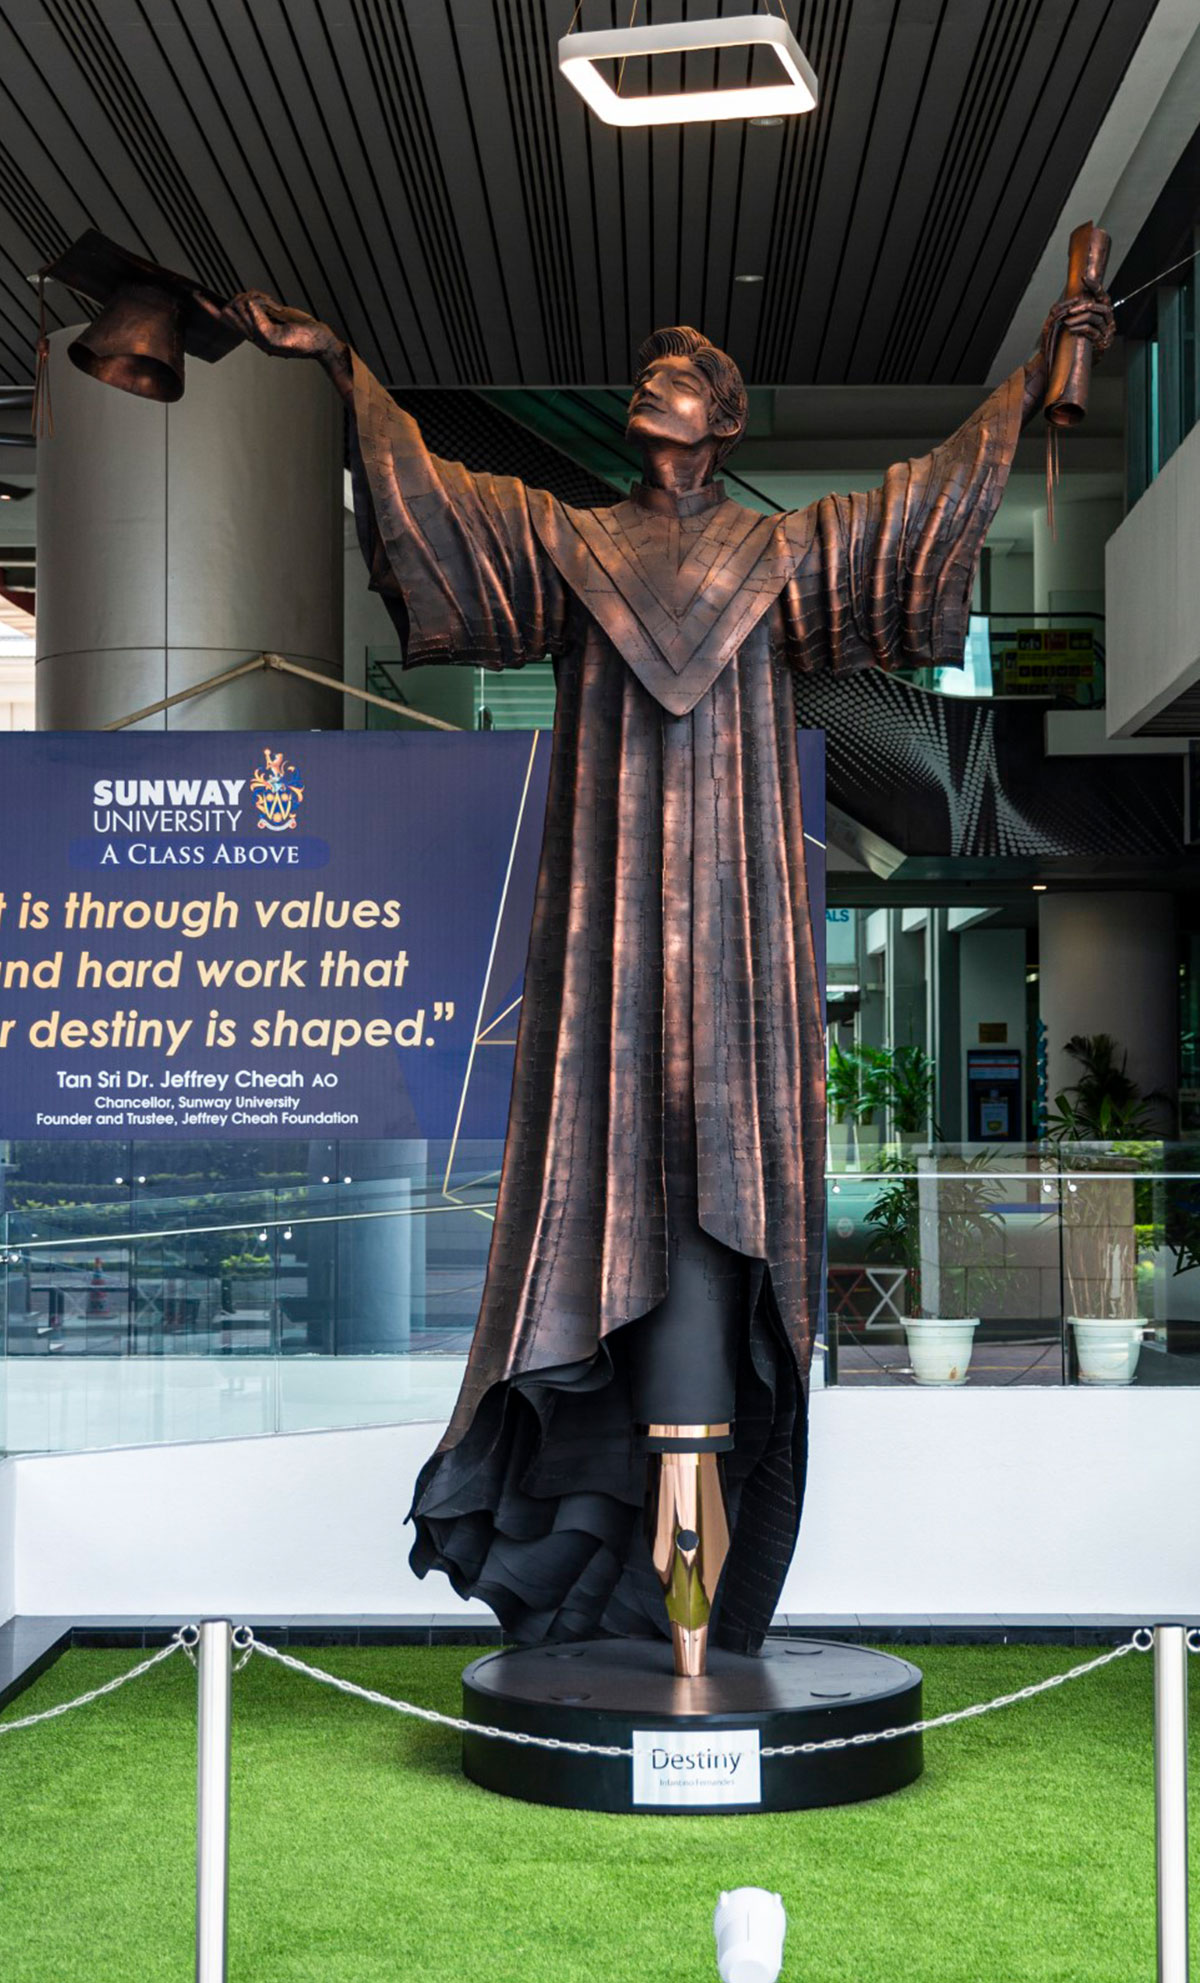 A bronze metal sculpture of a man holding a scroll and a graduation cap in each hand located at the lobby of Sunway University named ‘Destiny’.